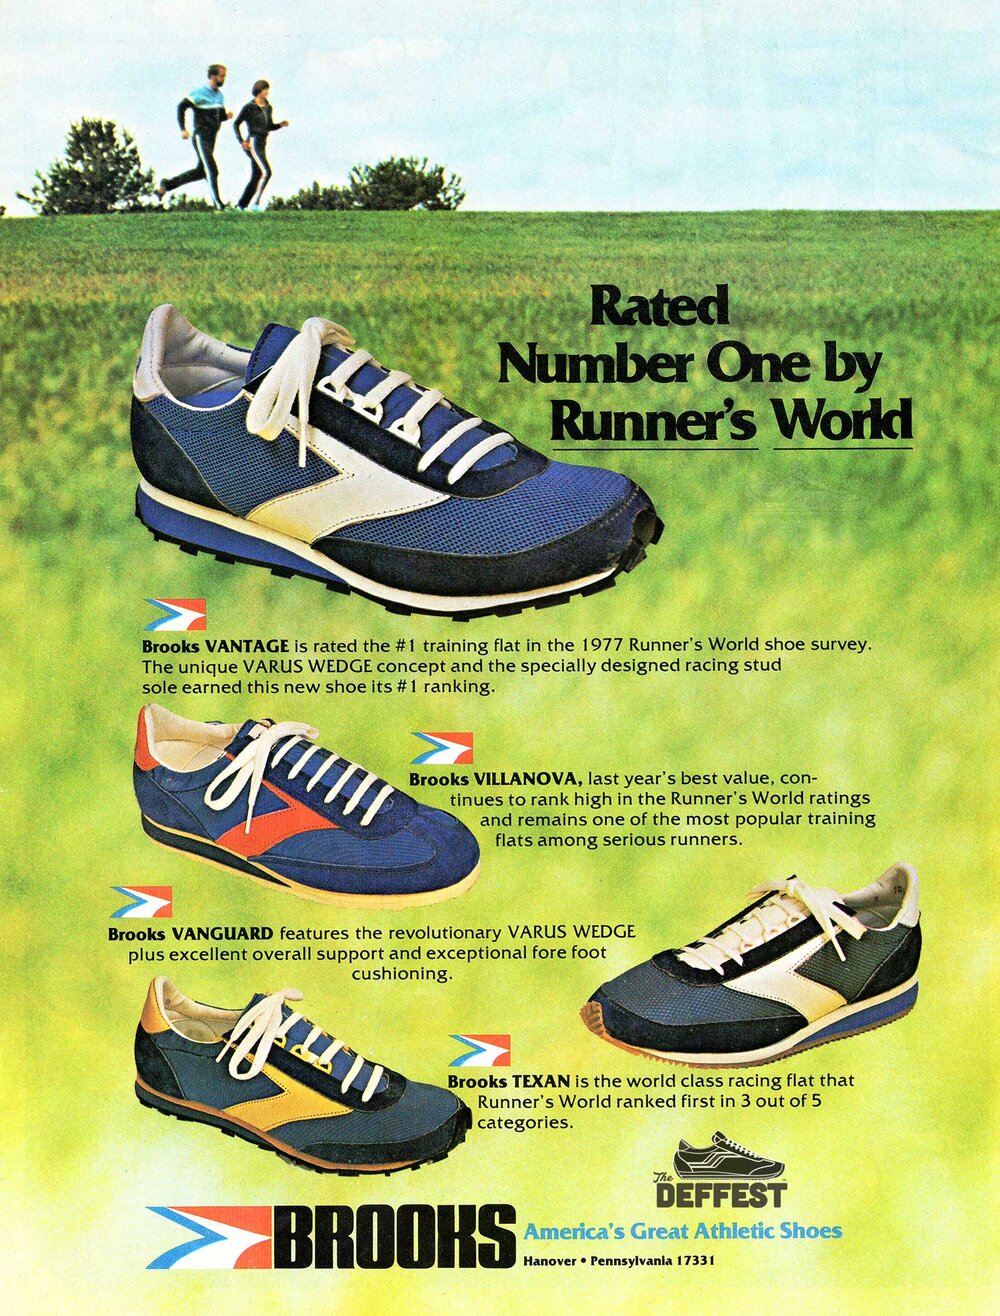 70s sneakers — The Deffest®. A vintage and retro sneaker blog 